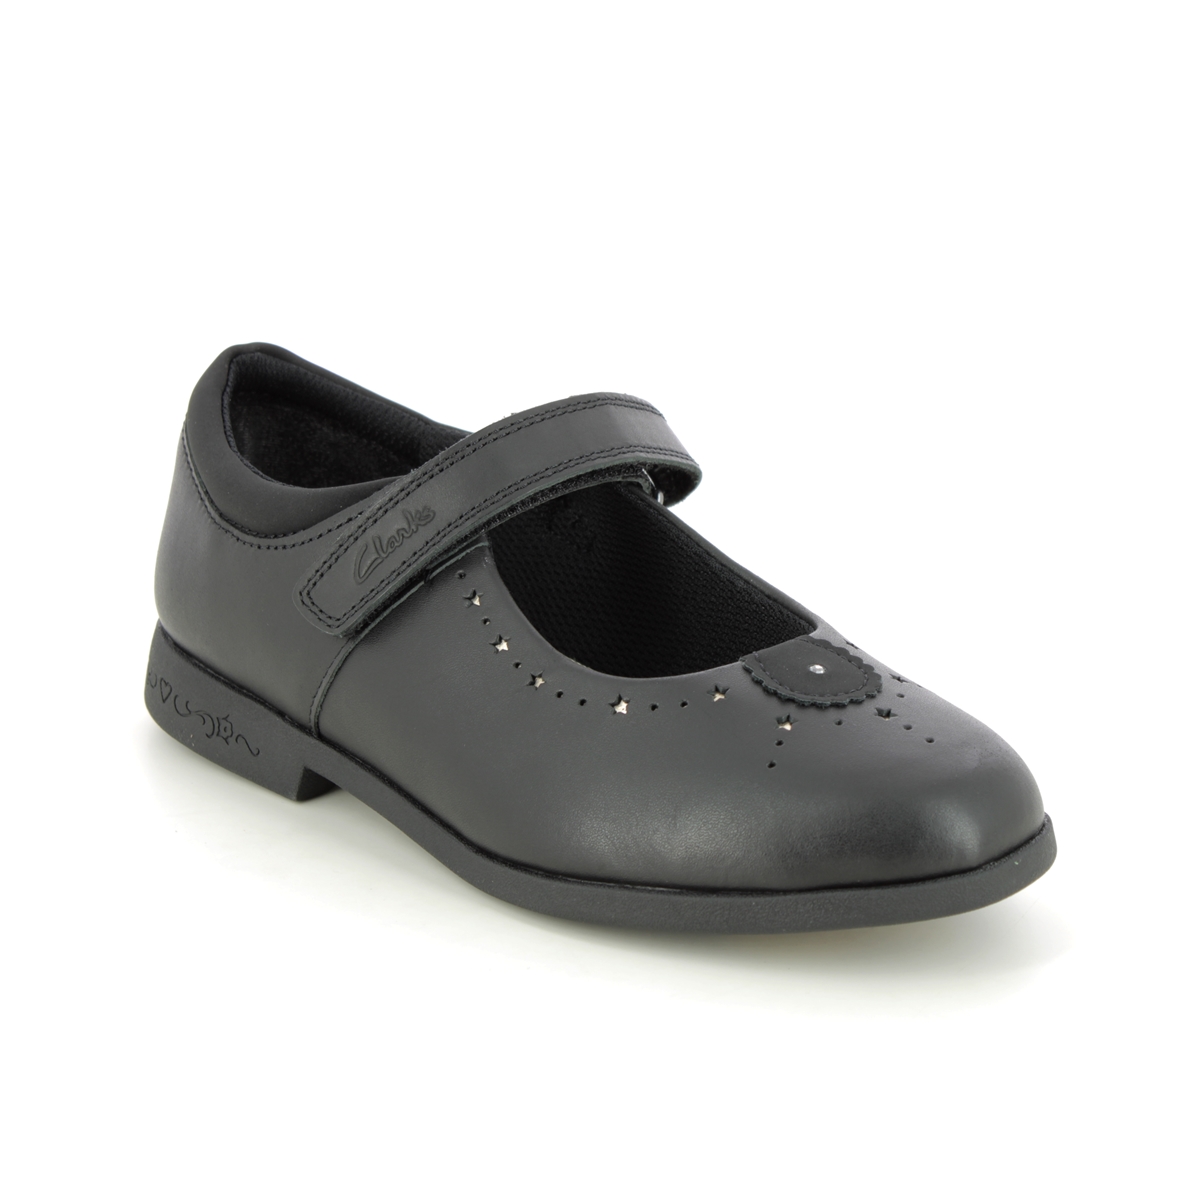 Clarks Magic Step Mj O Black leather Kids girls school shoes 6970-56F in a Plain Leather in Size 2